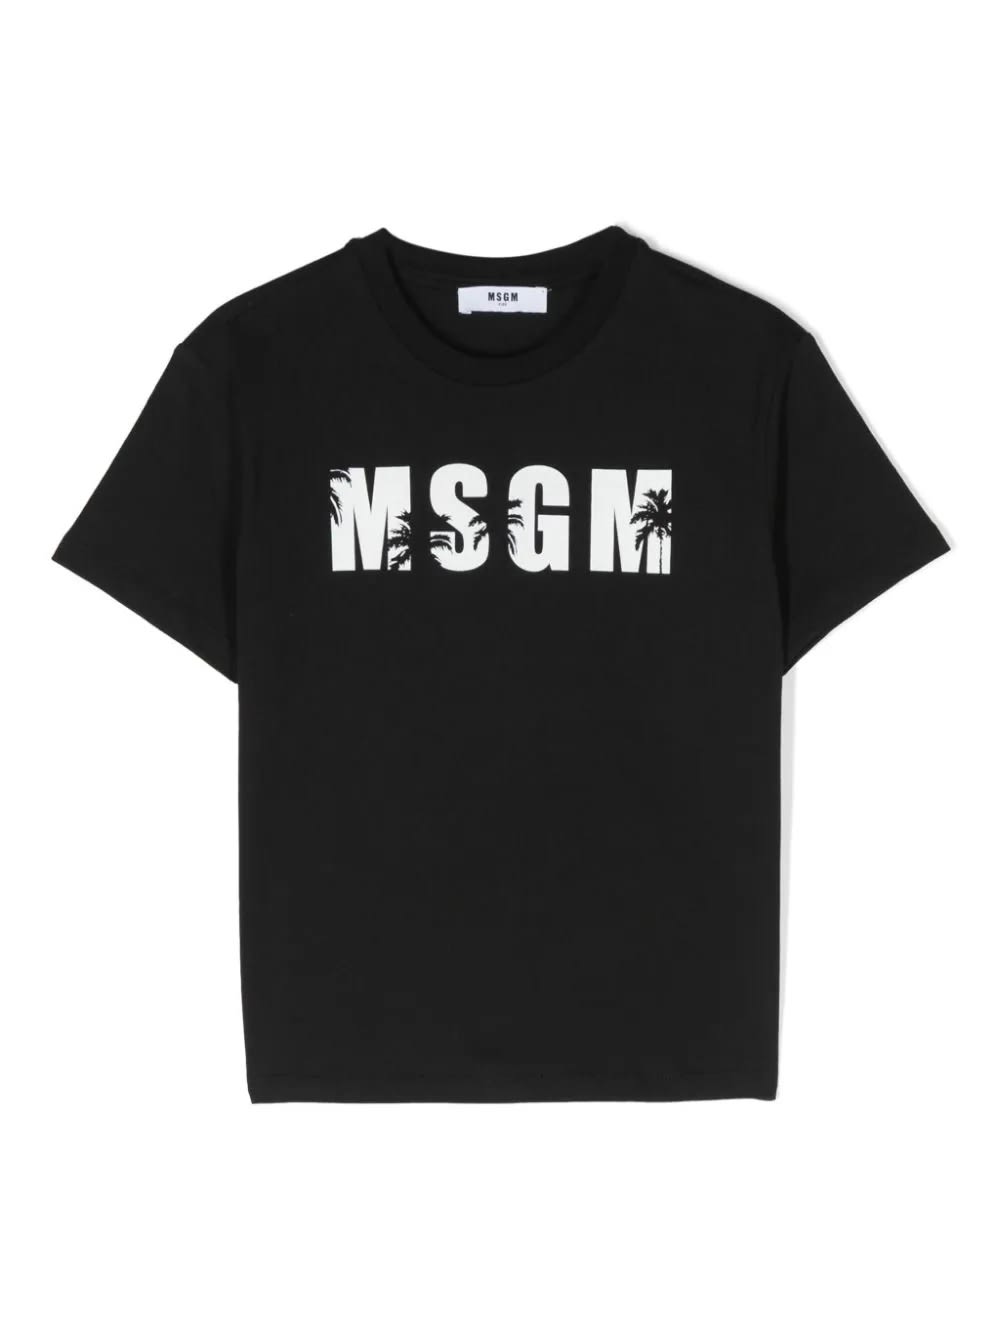 MSGM BLACK T-SHIRT WITH LOGO AND PALM TREES